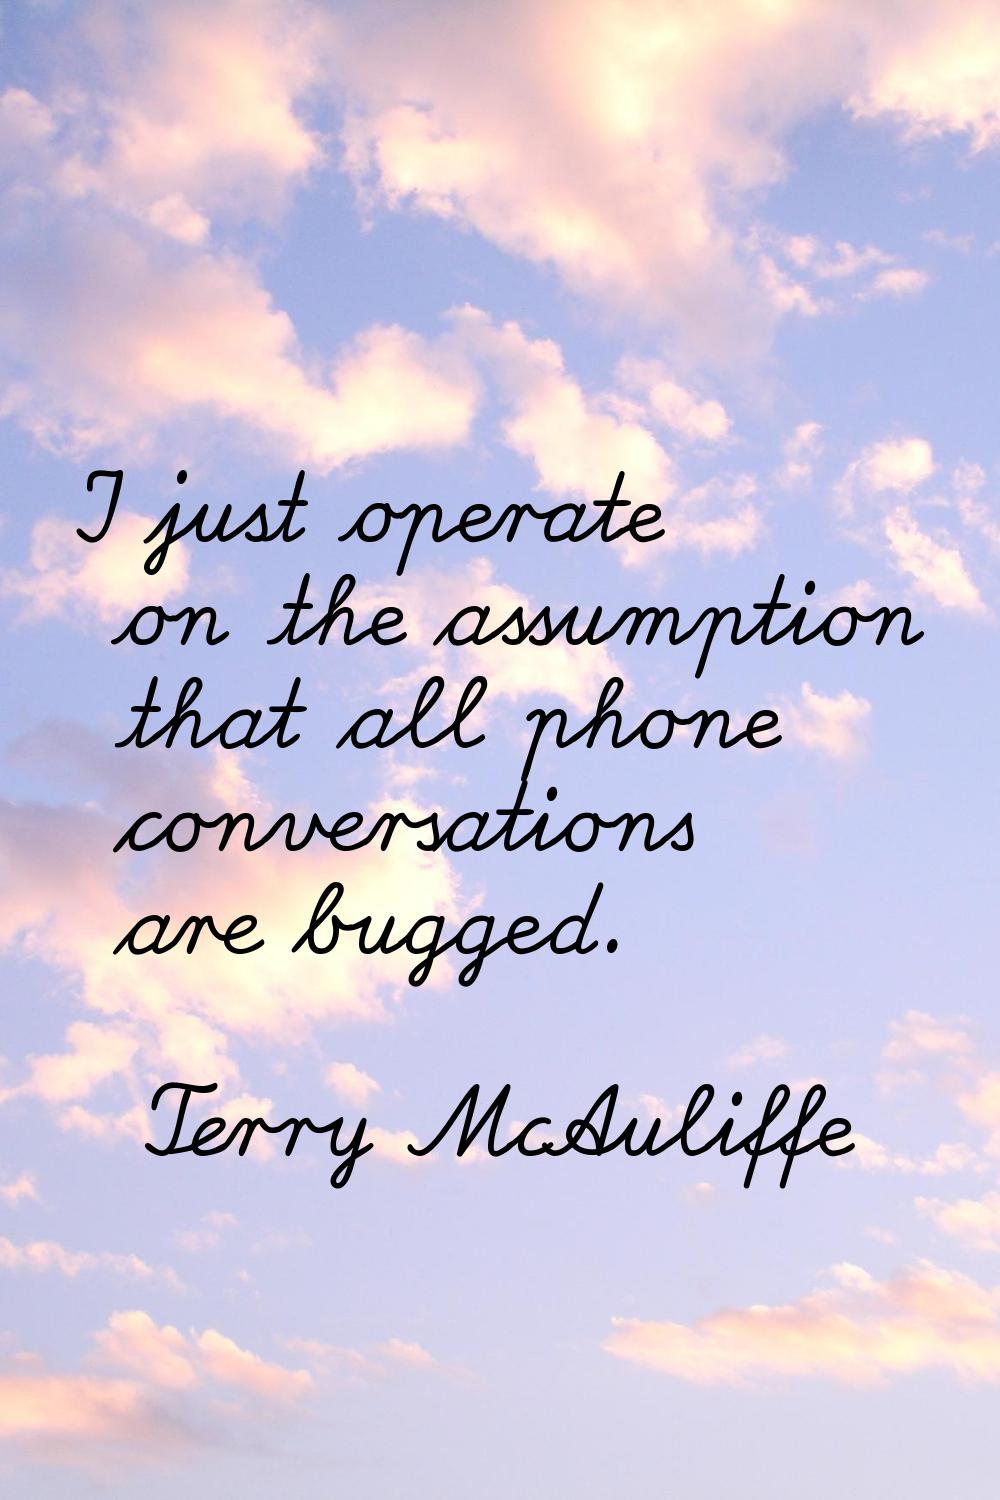 I just operate on the assumption that all phone conversations are bugged.